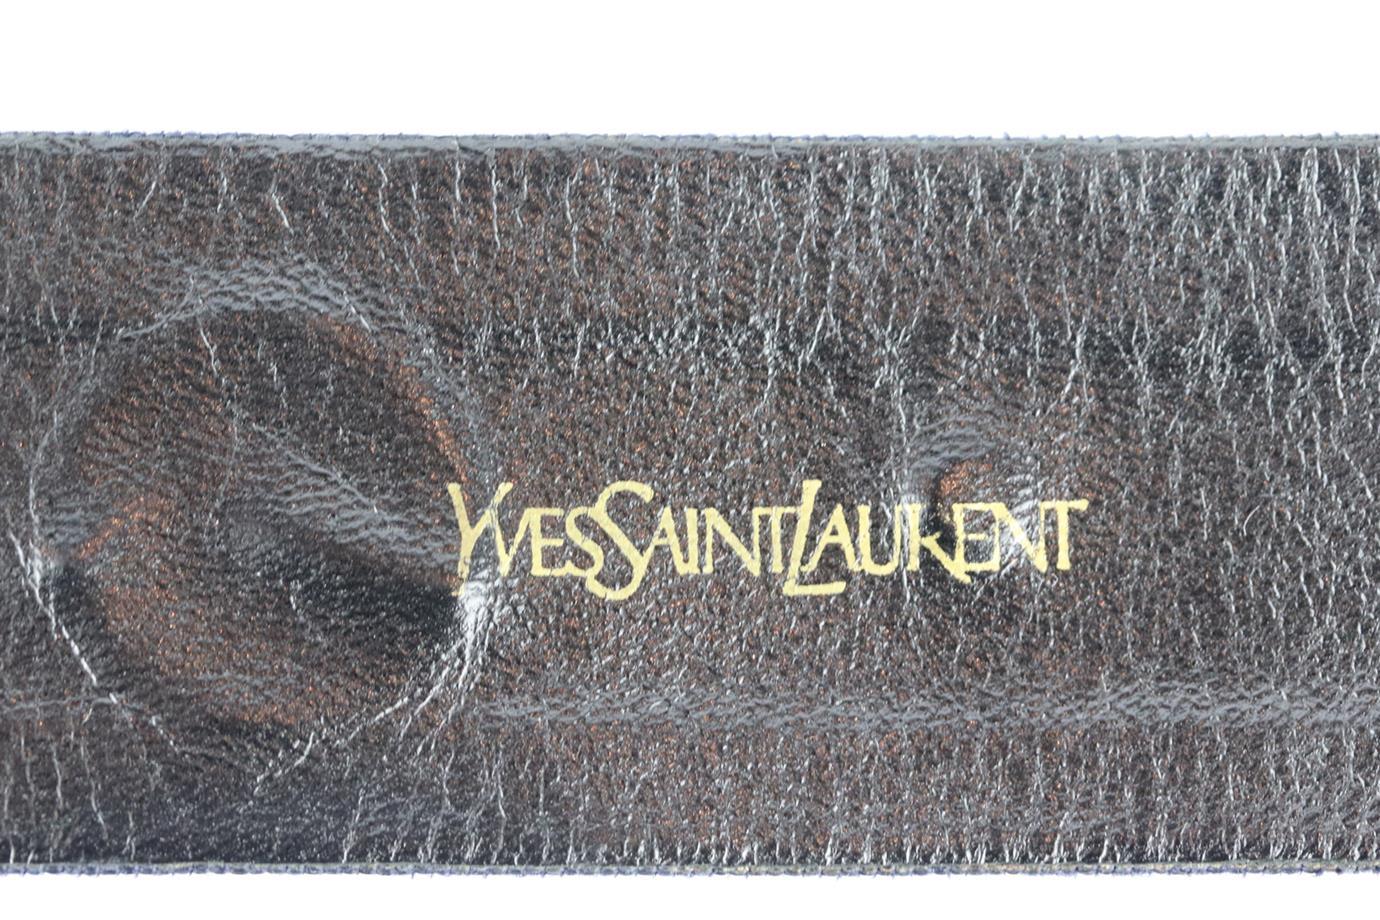 Yves Saint Laurent Vintage embellished grosgrain waist belt. Made from navy grosgrain with gold-tone suns. Navy. Buckle fastening at front. Min Length: 26 in. Max Length: 28 in. Width: 1.6 in